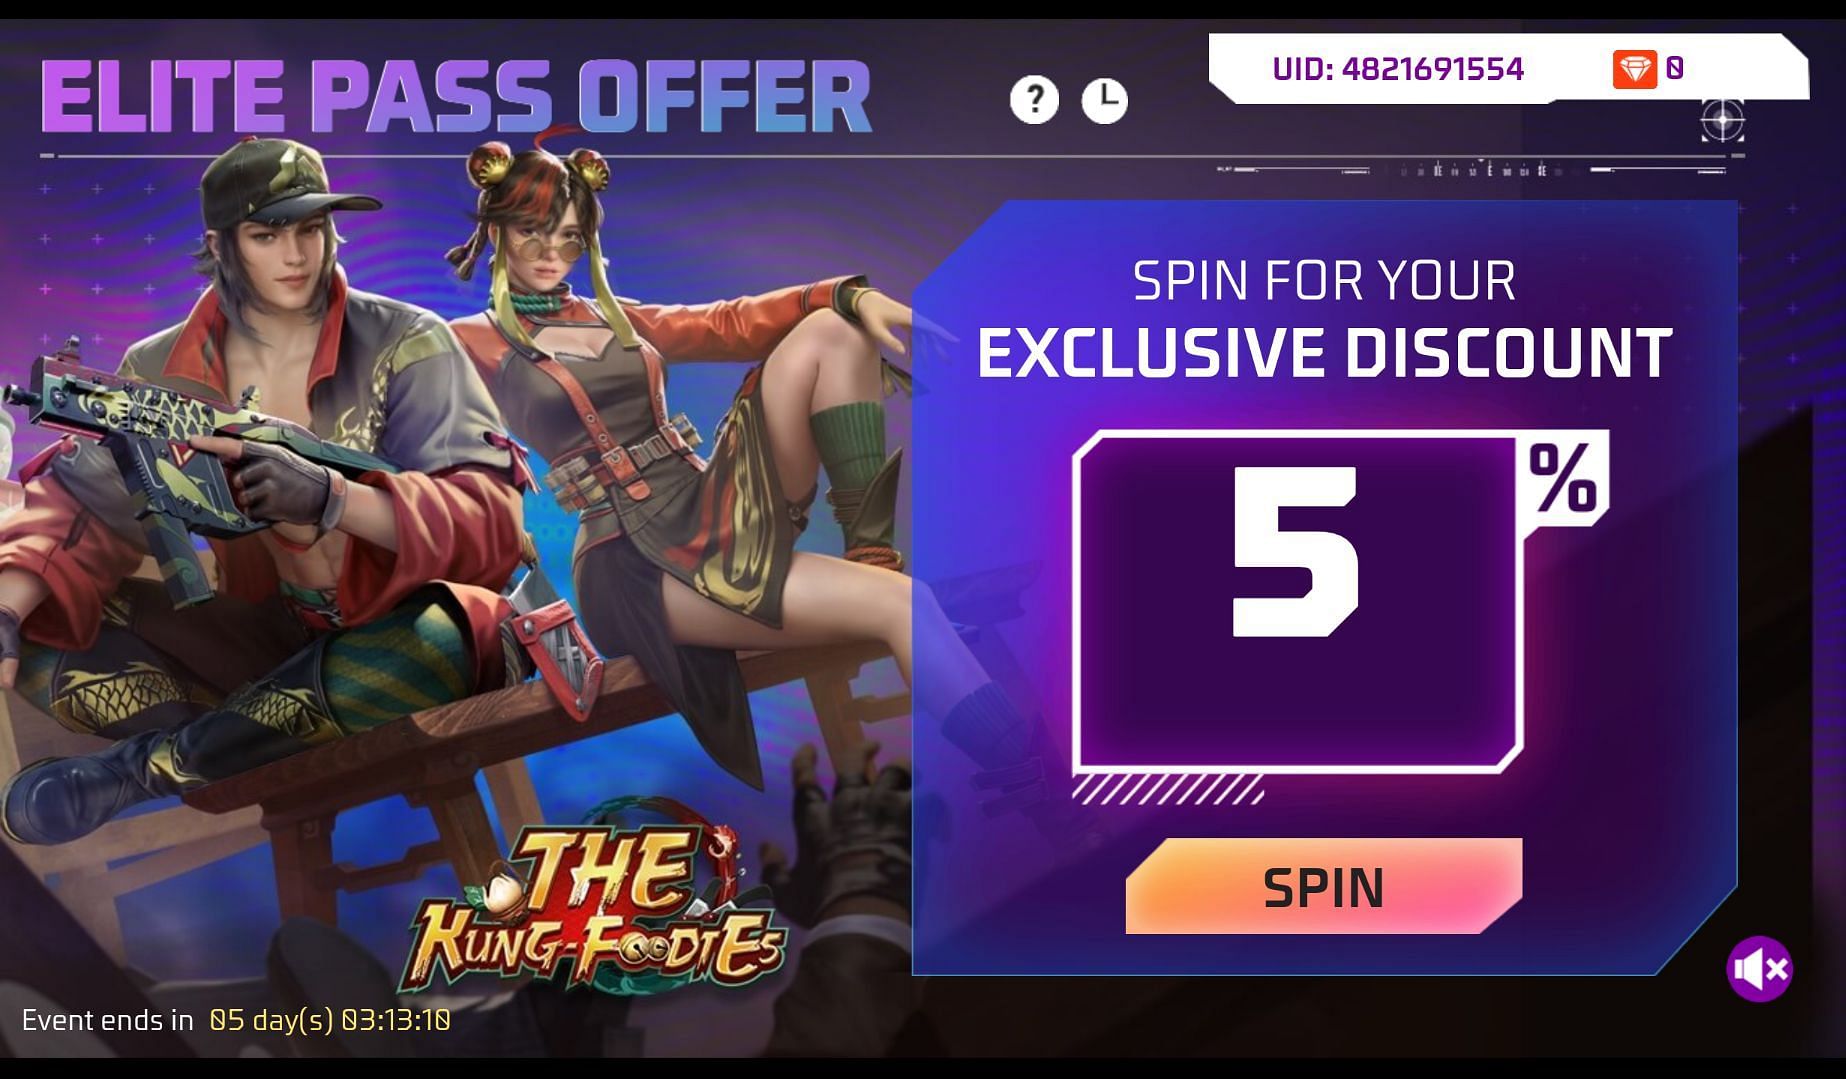 Gamers need to first obtain the exclusive discount percentage (Image via Garena)